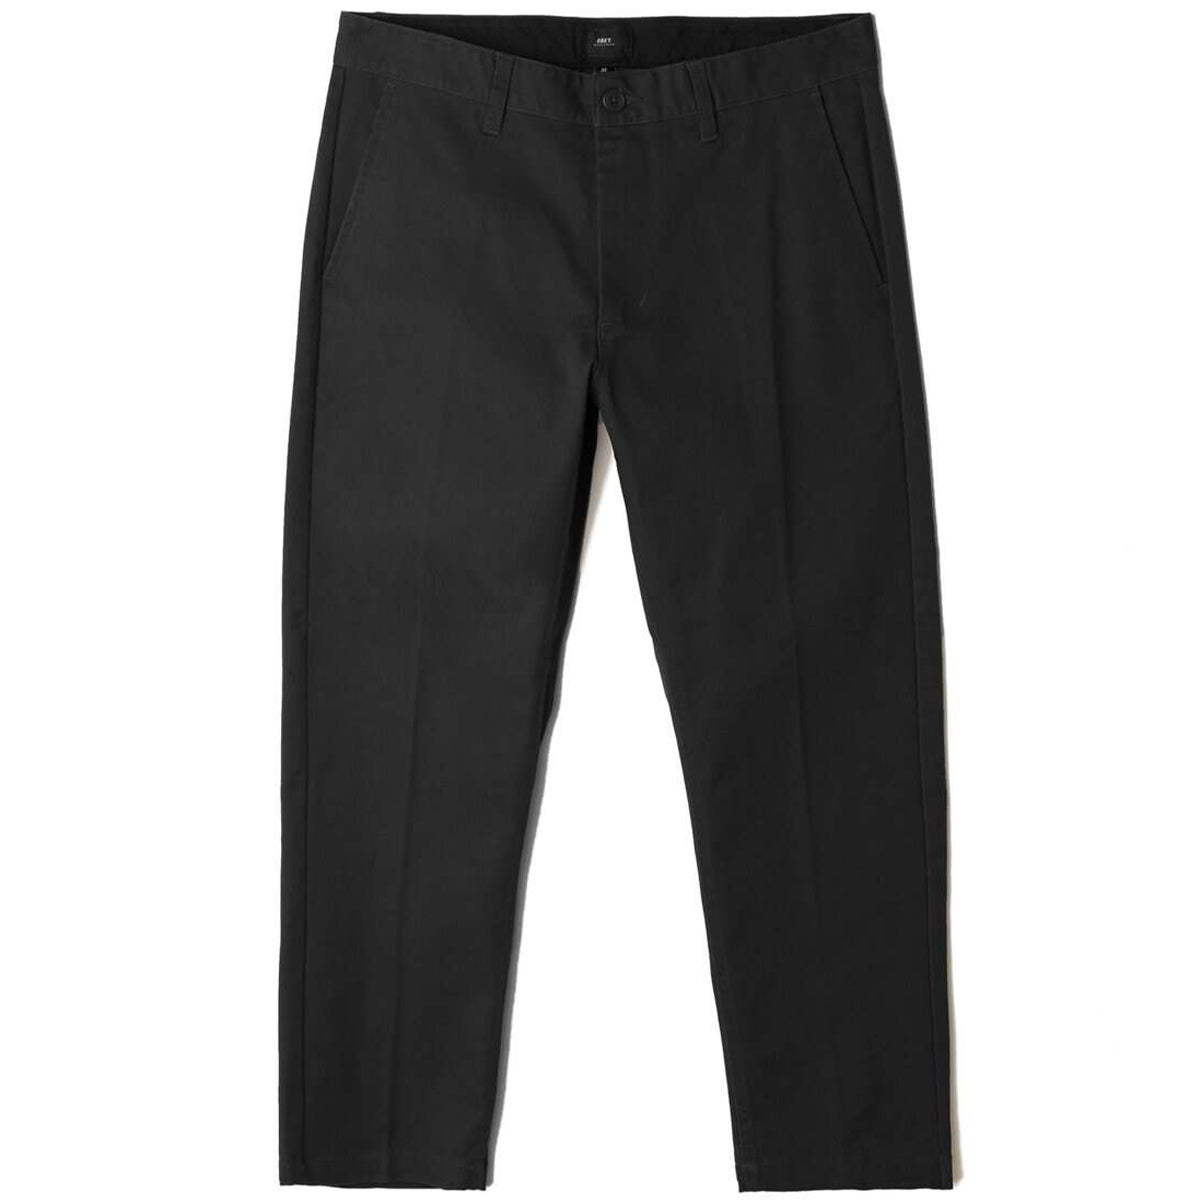 Obey Straggler Flooded Pants in Black | Boardertown